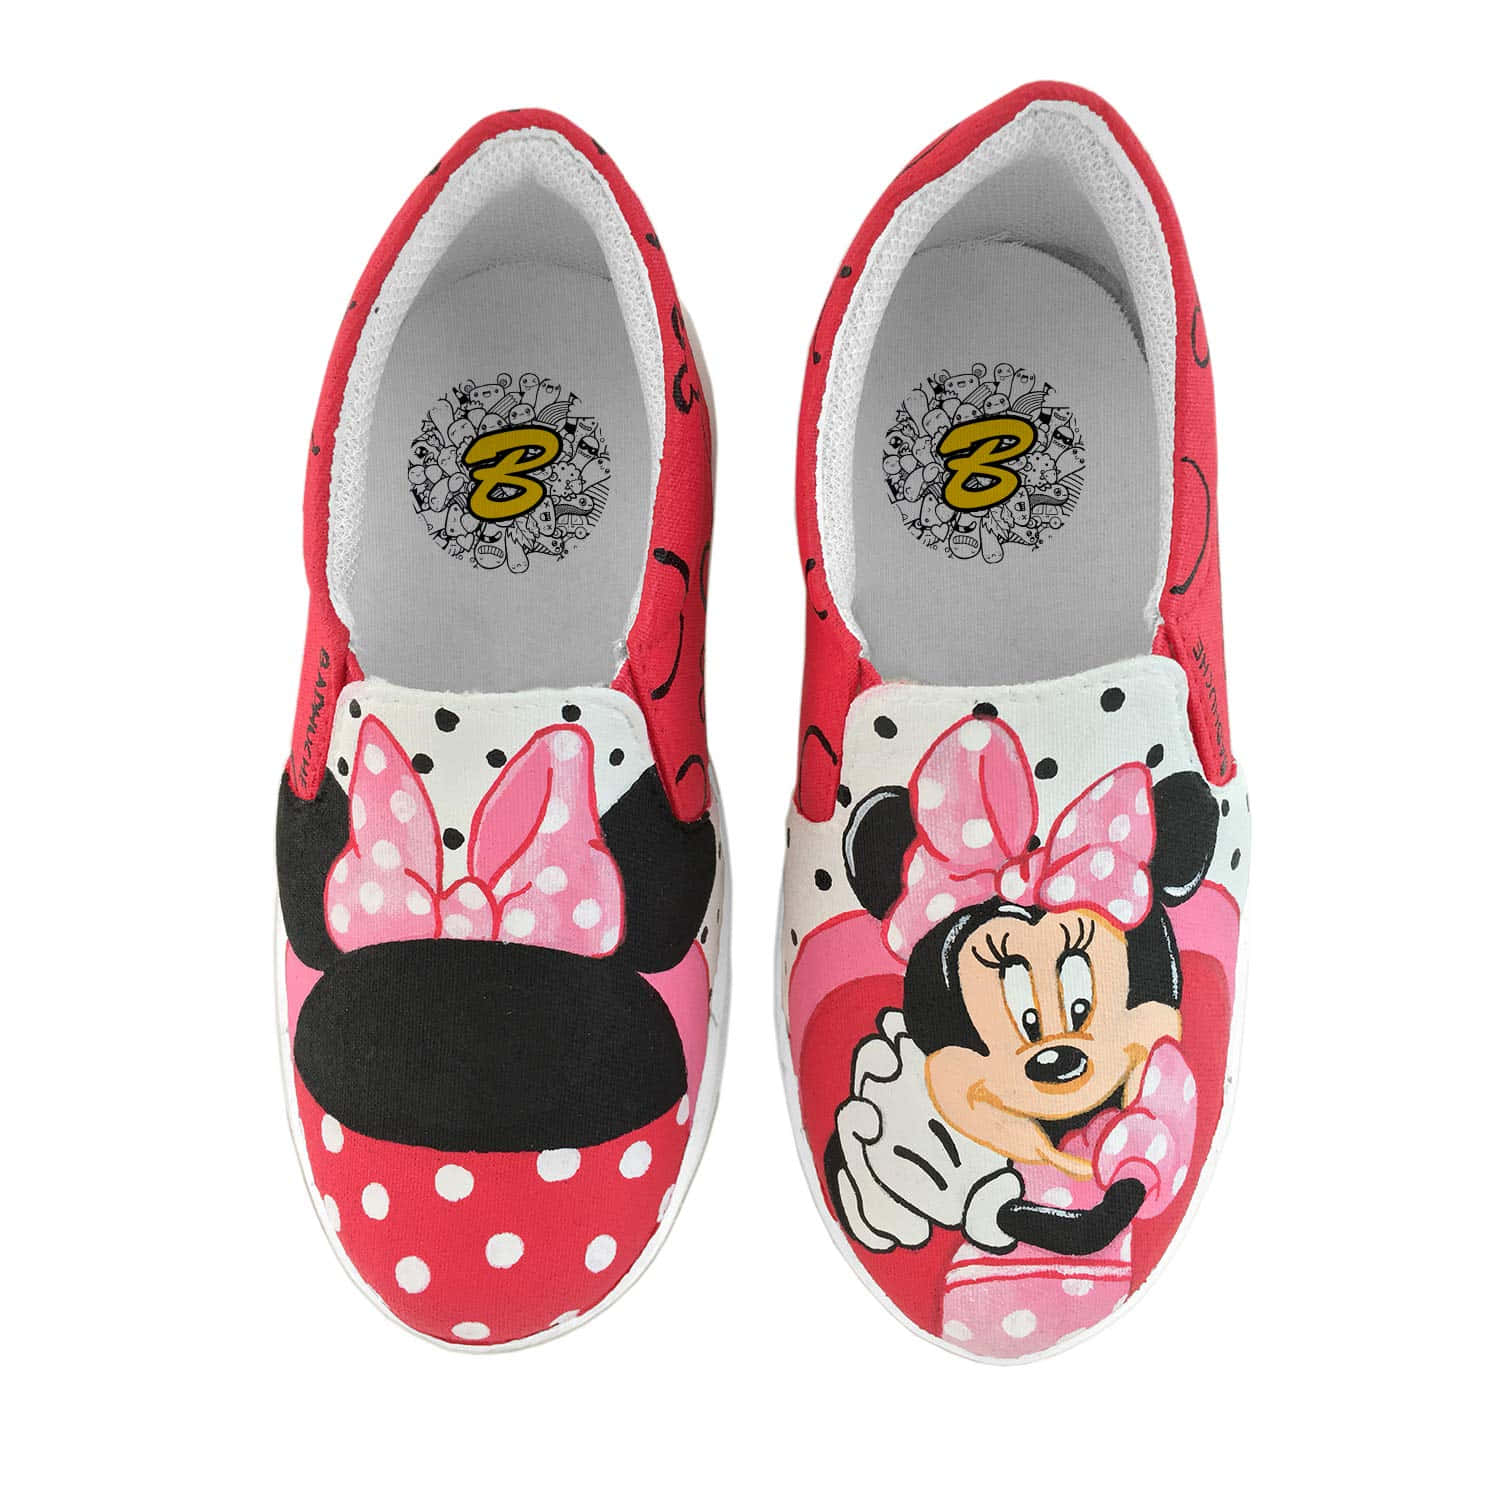 Minniemouse Slip-on Shoes Would Be Translated To 